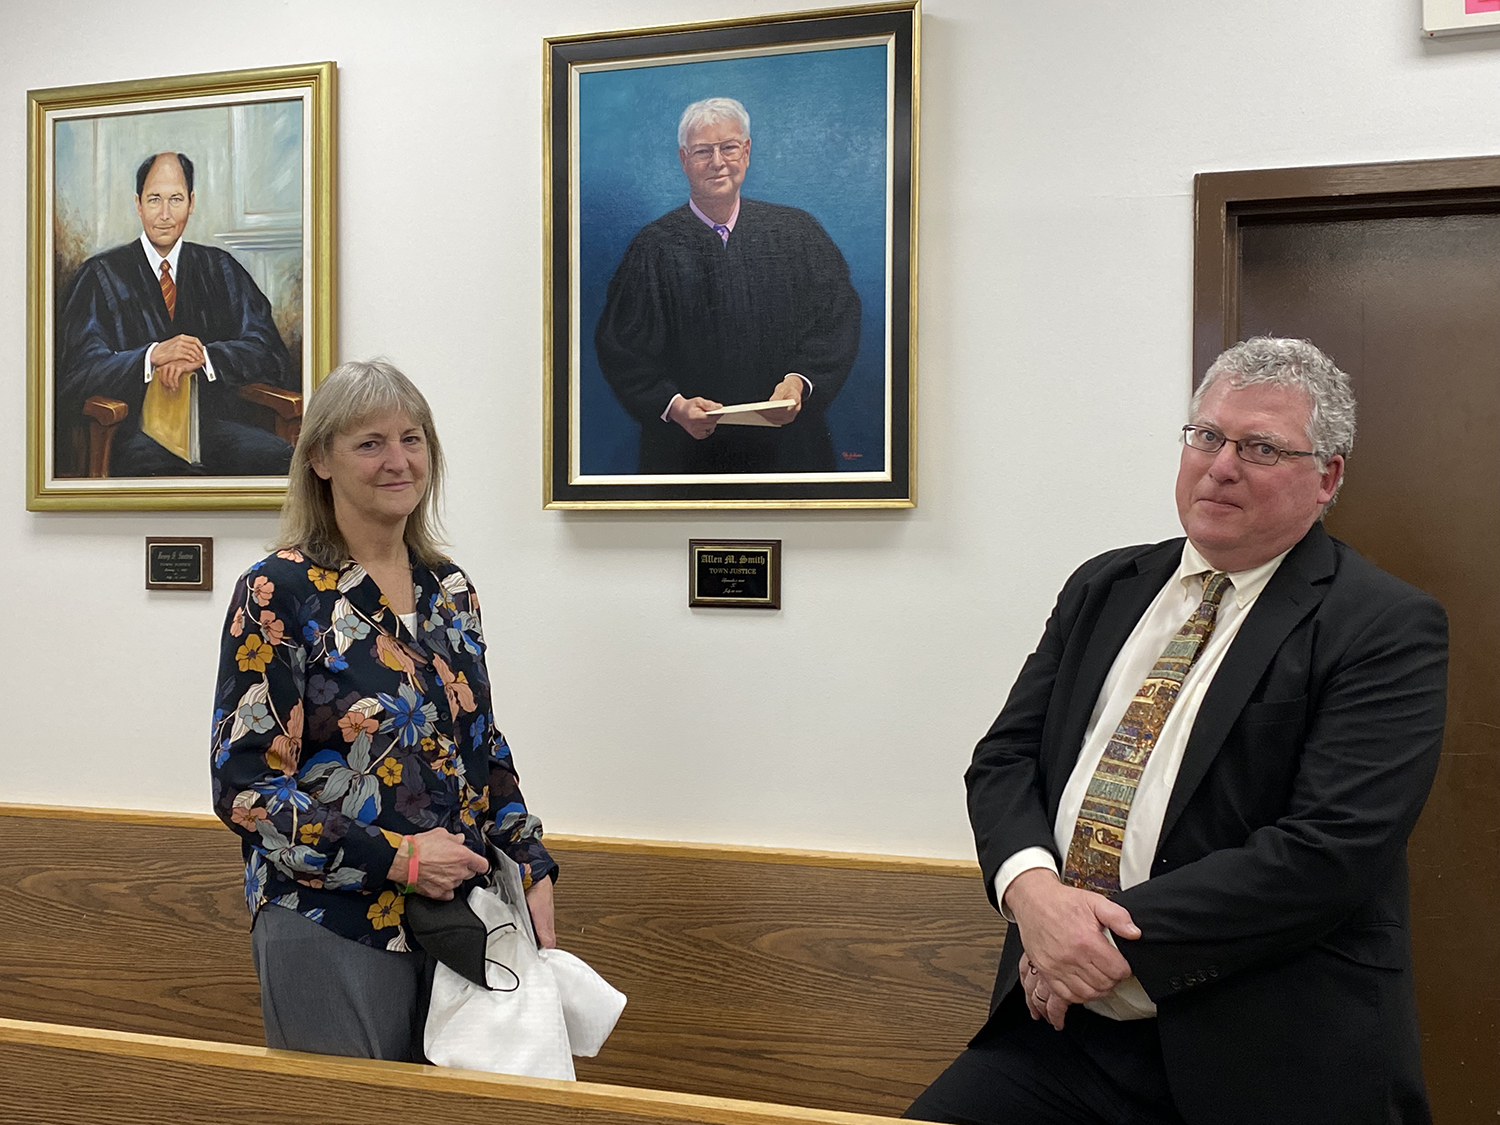 Portrait of late Justice Allen Smith unveiled at town justice court